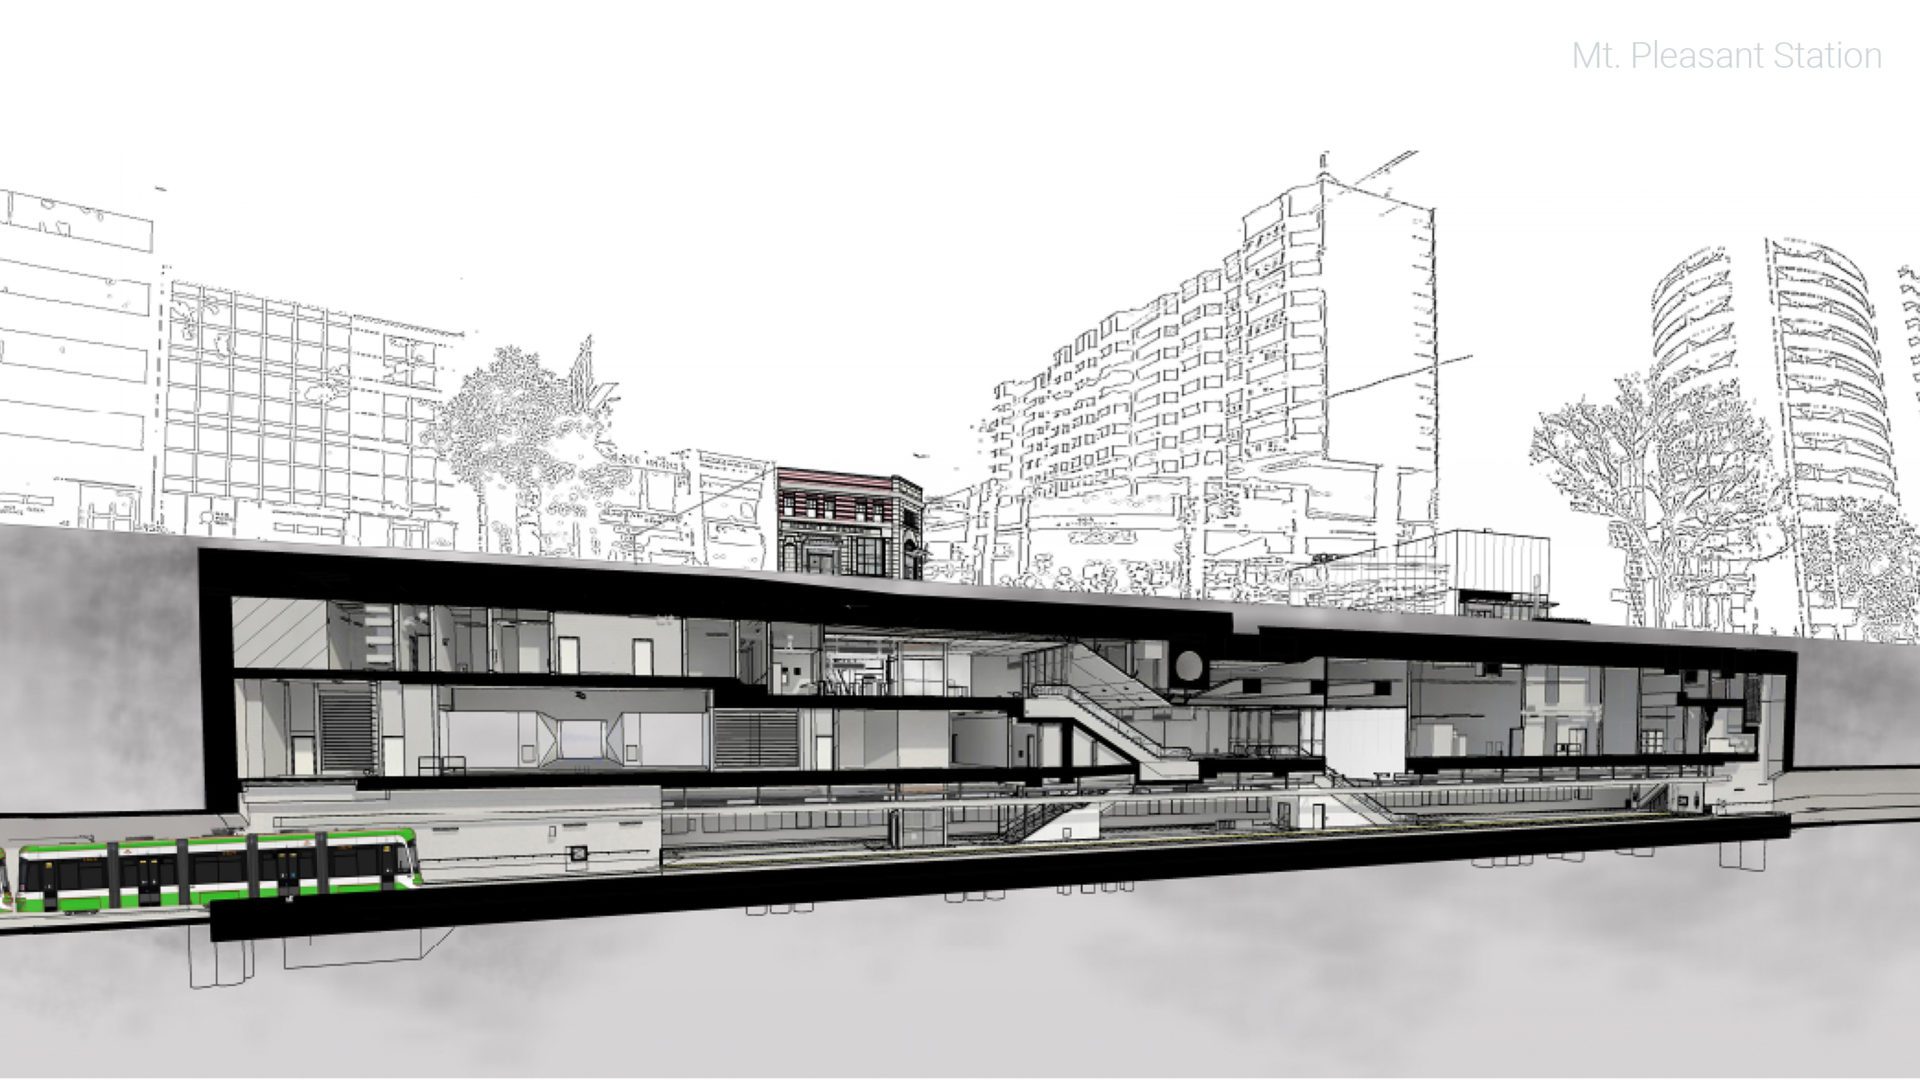 rendering of mt pleasant station provides interior view of all levels. subway in tunnel seem at the bottom